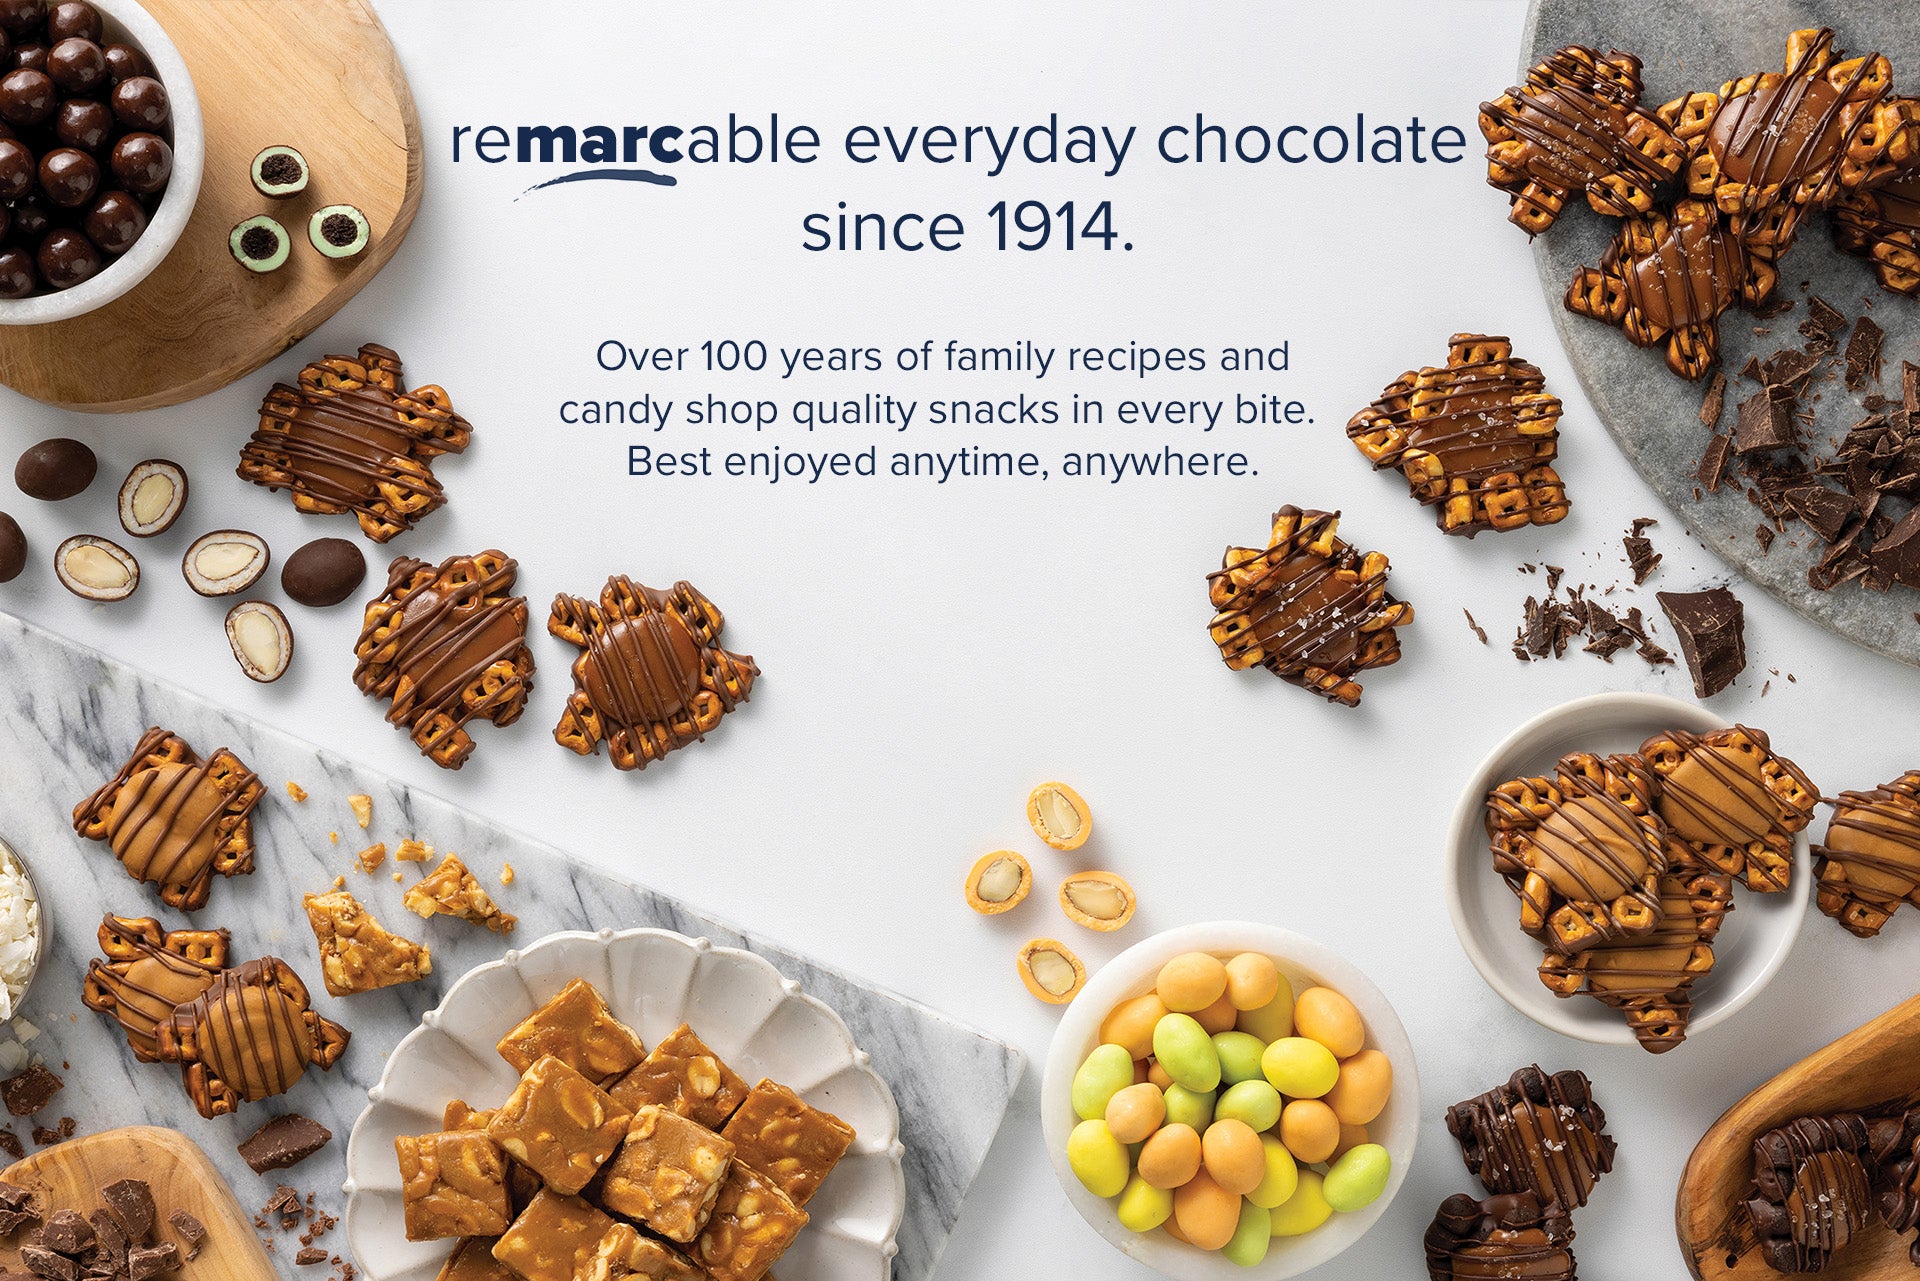 Remarcable everyday chocolate since 1914.  Over 100 years of family recipes and candy shop quality snacks in every bite. Best enjoyed anytime, anywhere.  Overlaying an image of Two decorative ingredient swirls. One contains dark chocolate, coconut and almonds. The other contains caramel, pretzels, and chocolate bits.